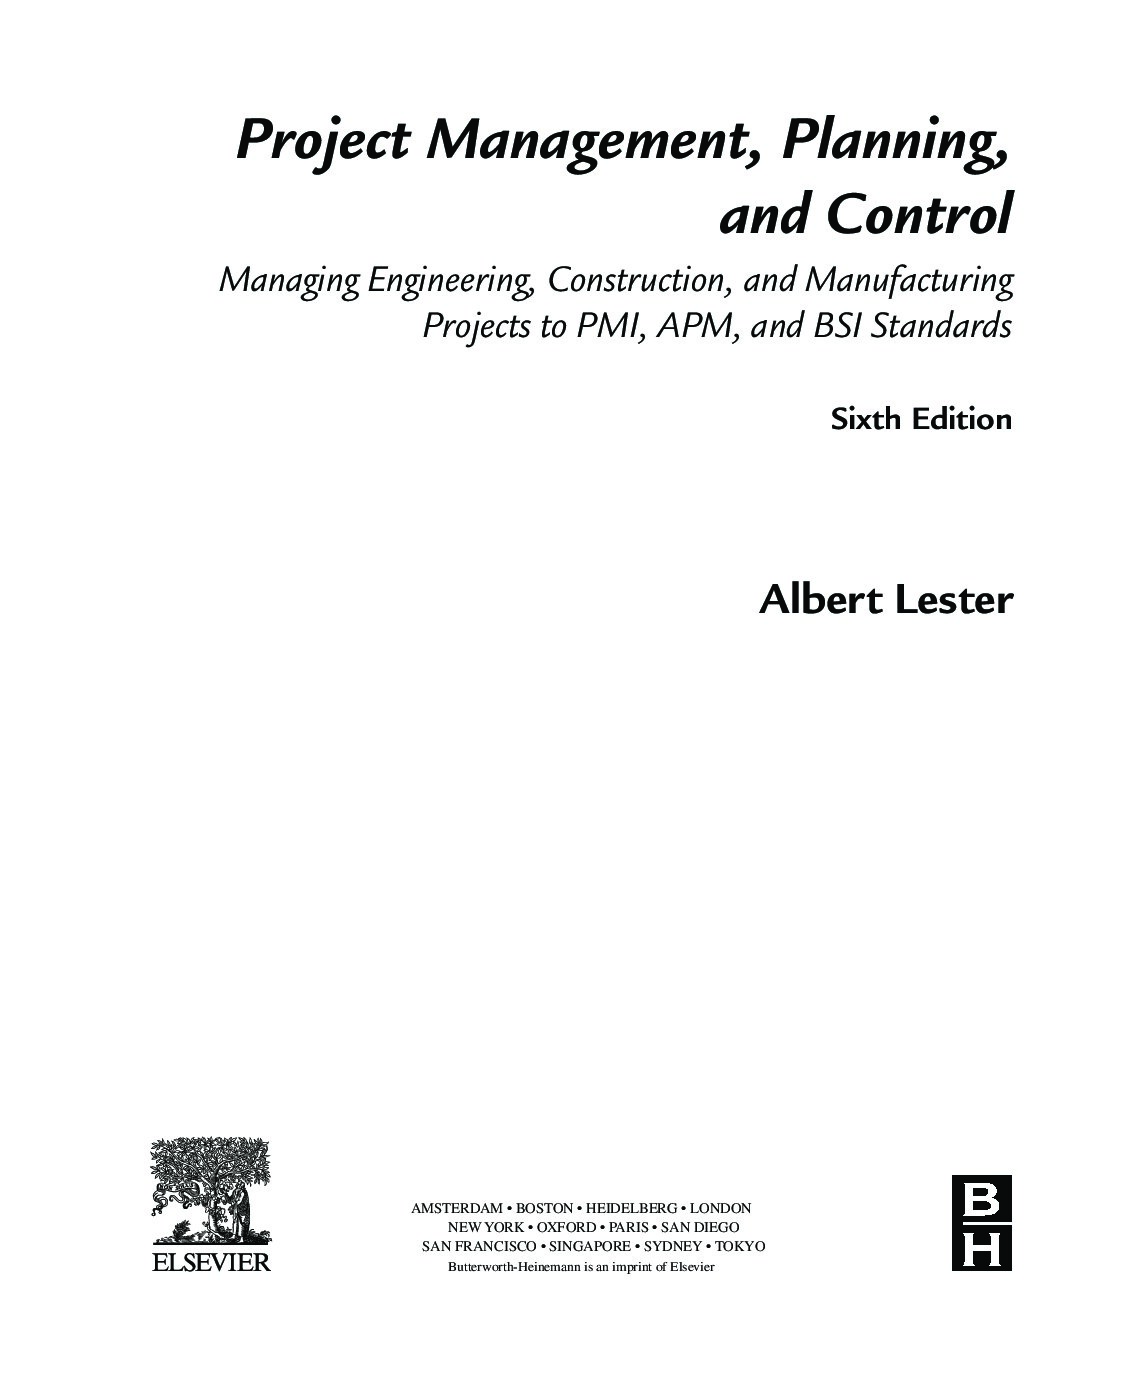 Project Management, Planning and Control, 6th(2014) Edition